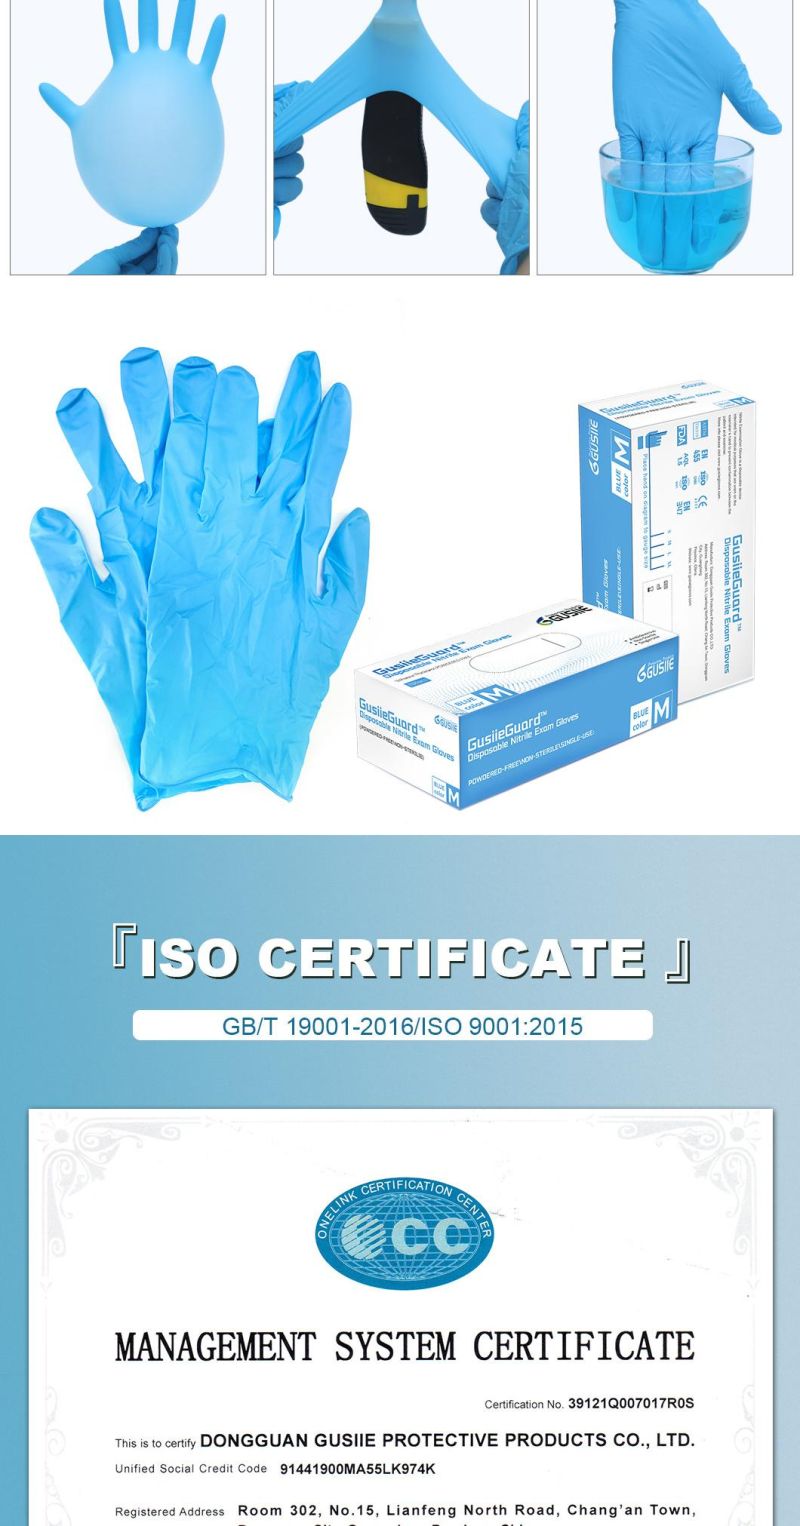 Gusiie Disposable Medical Safety Exam Blue Nitrile Large Gloves